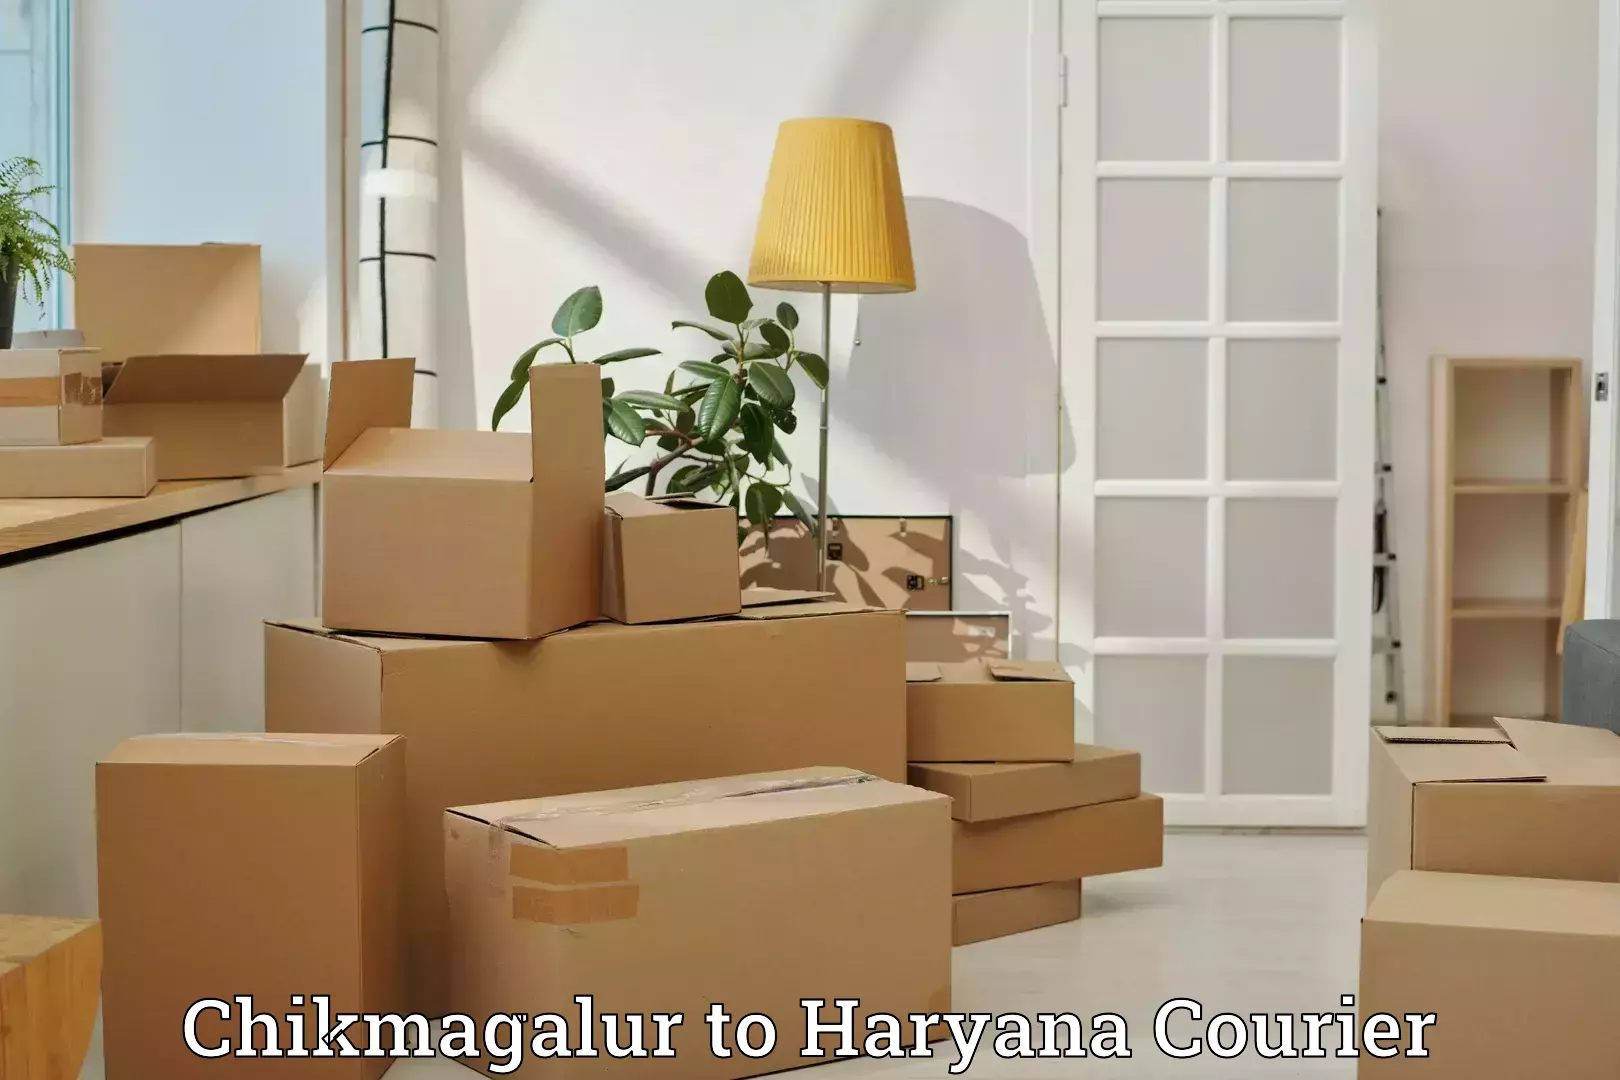 Emergency baggage service Chikmagalur to Haryana